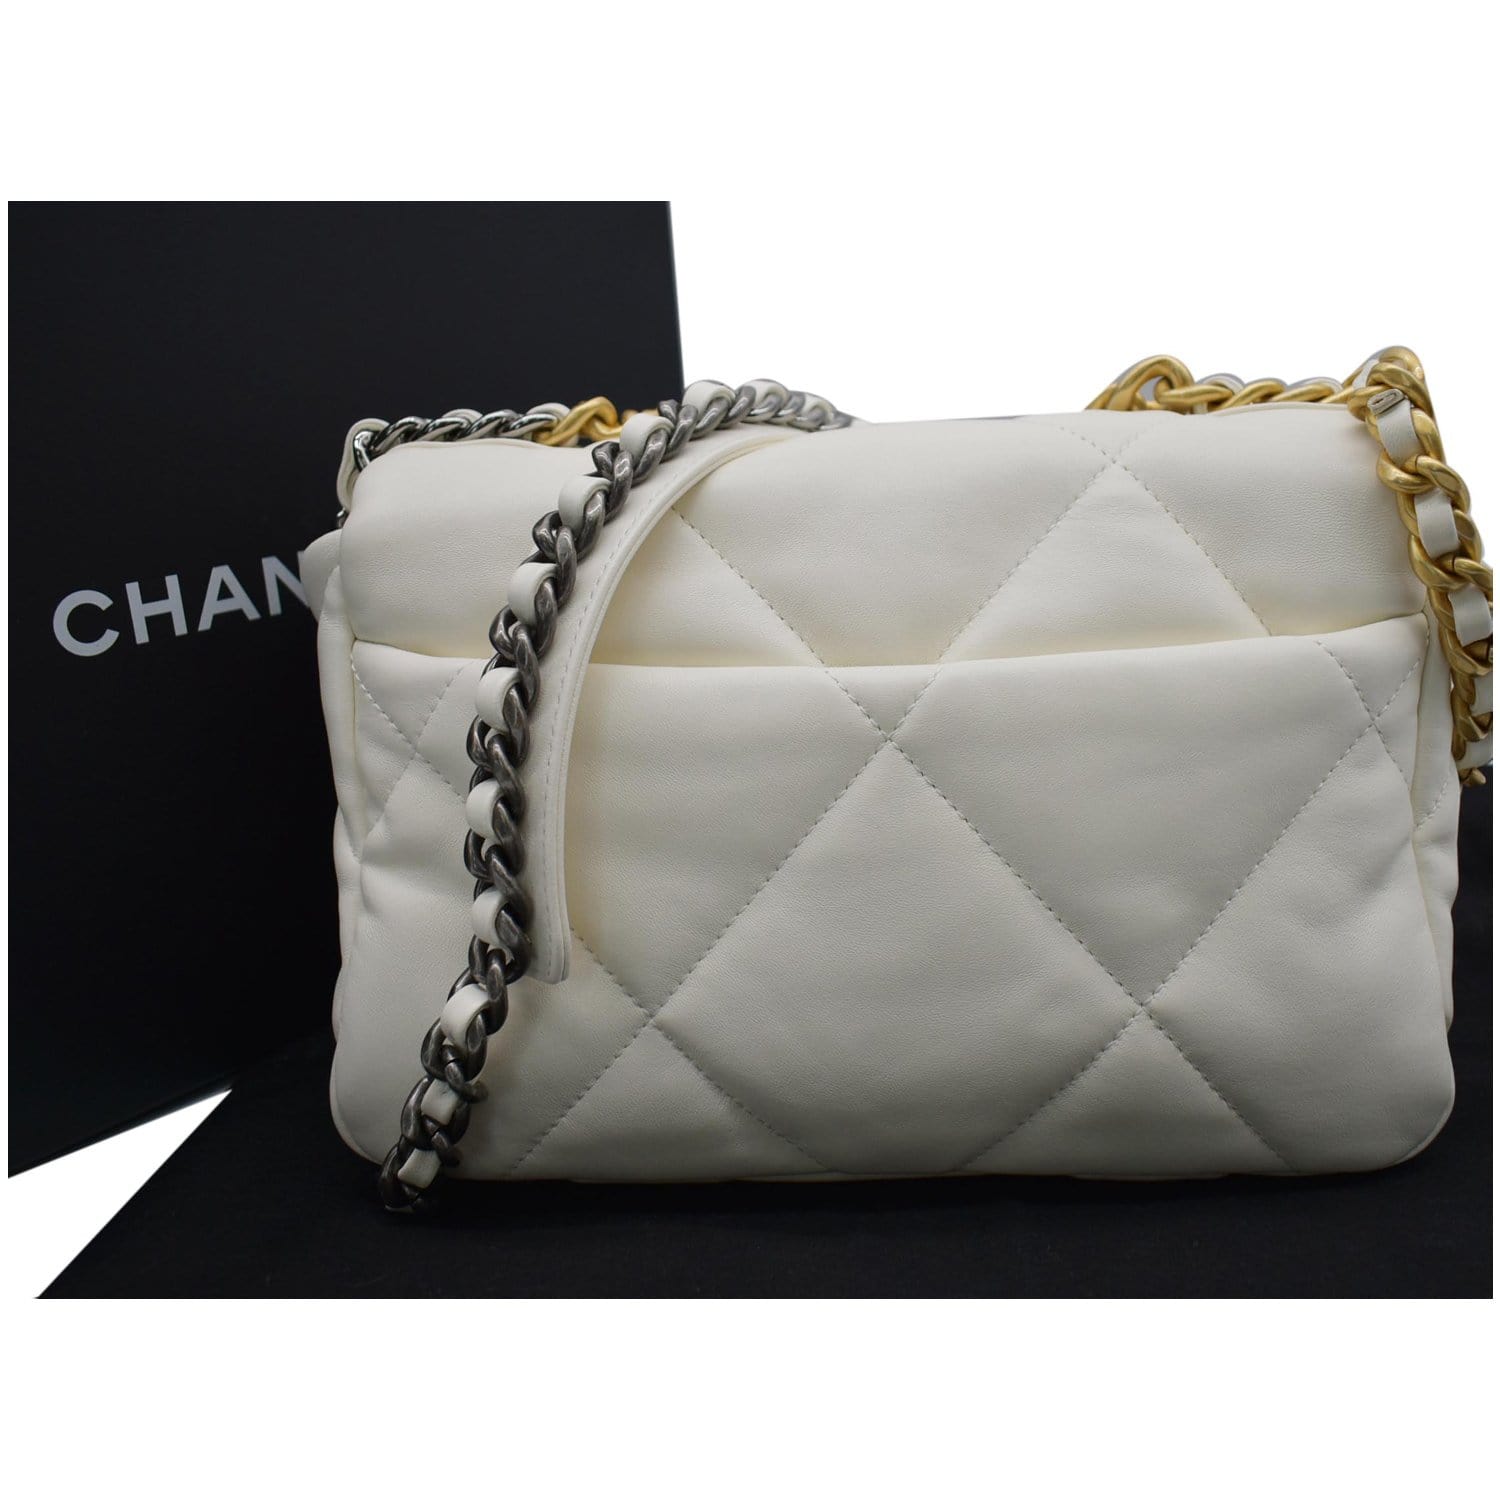 CHANEL Small Lambskin Leather Bag White